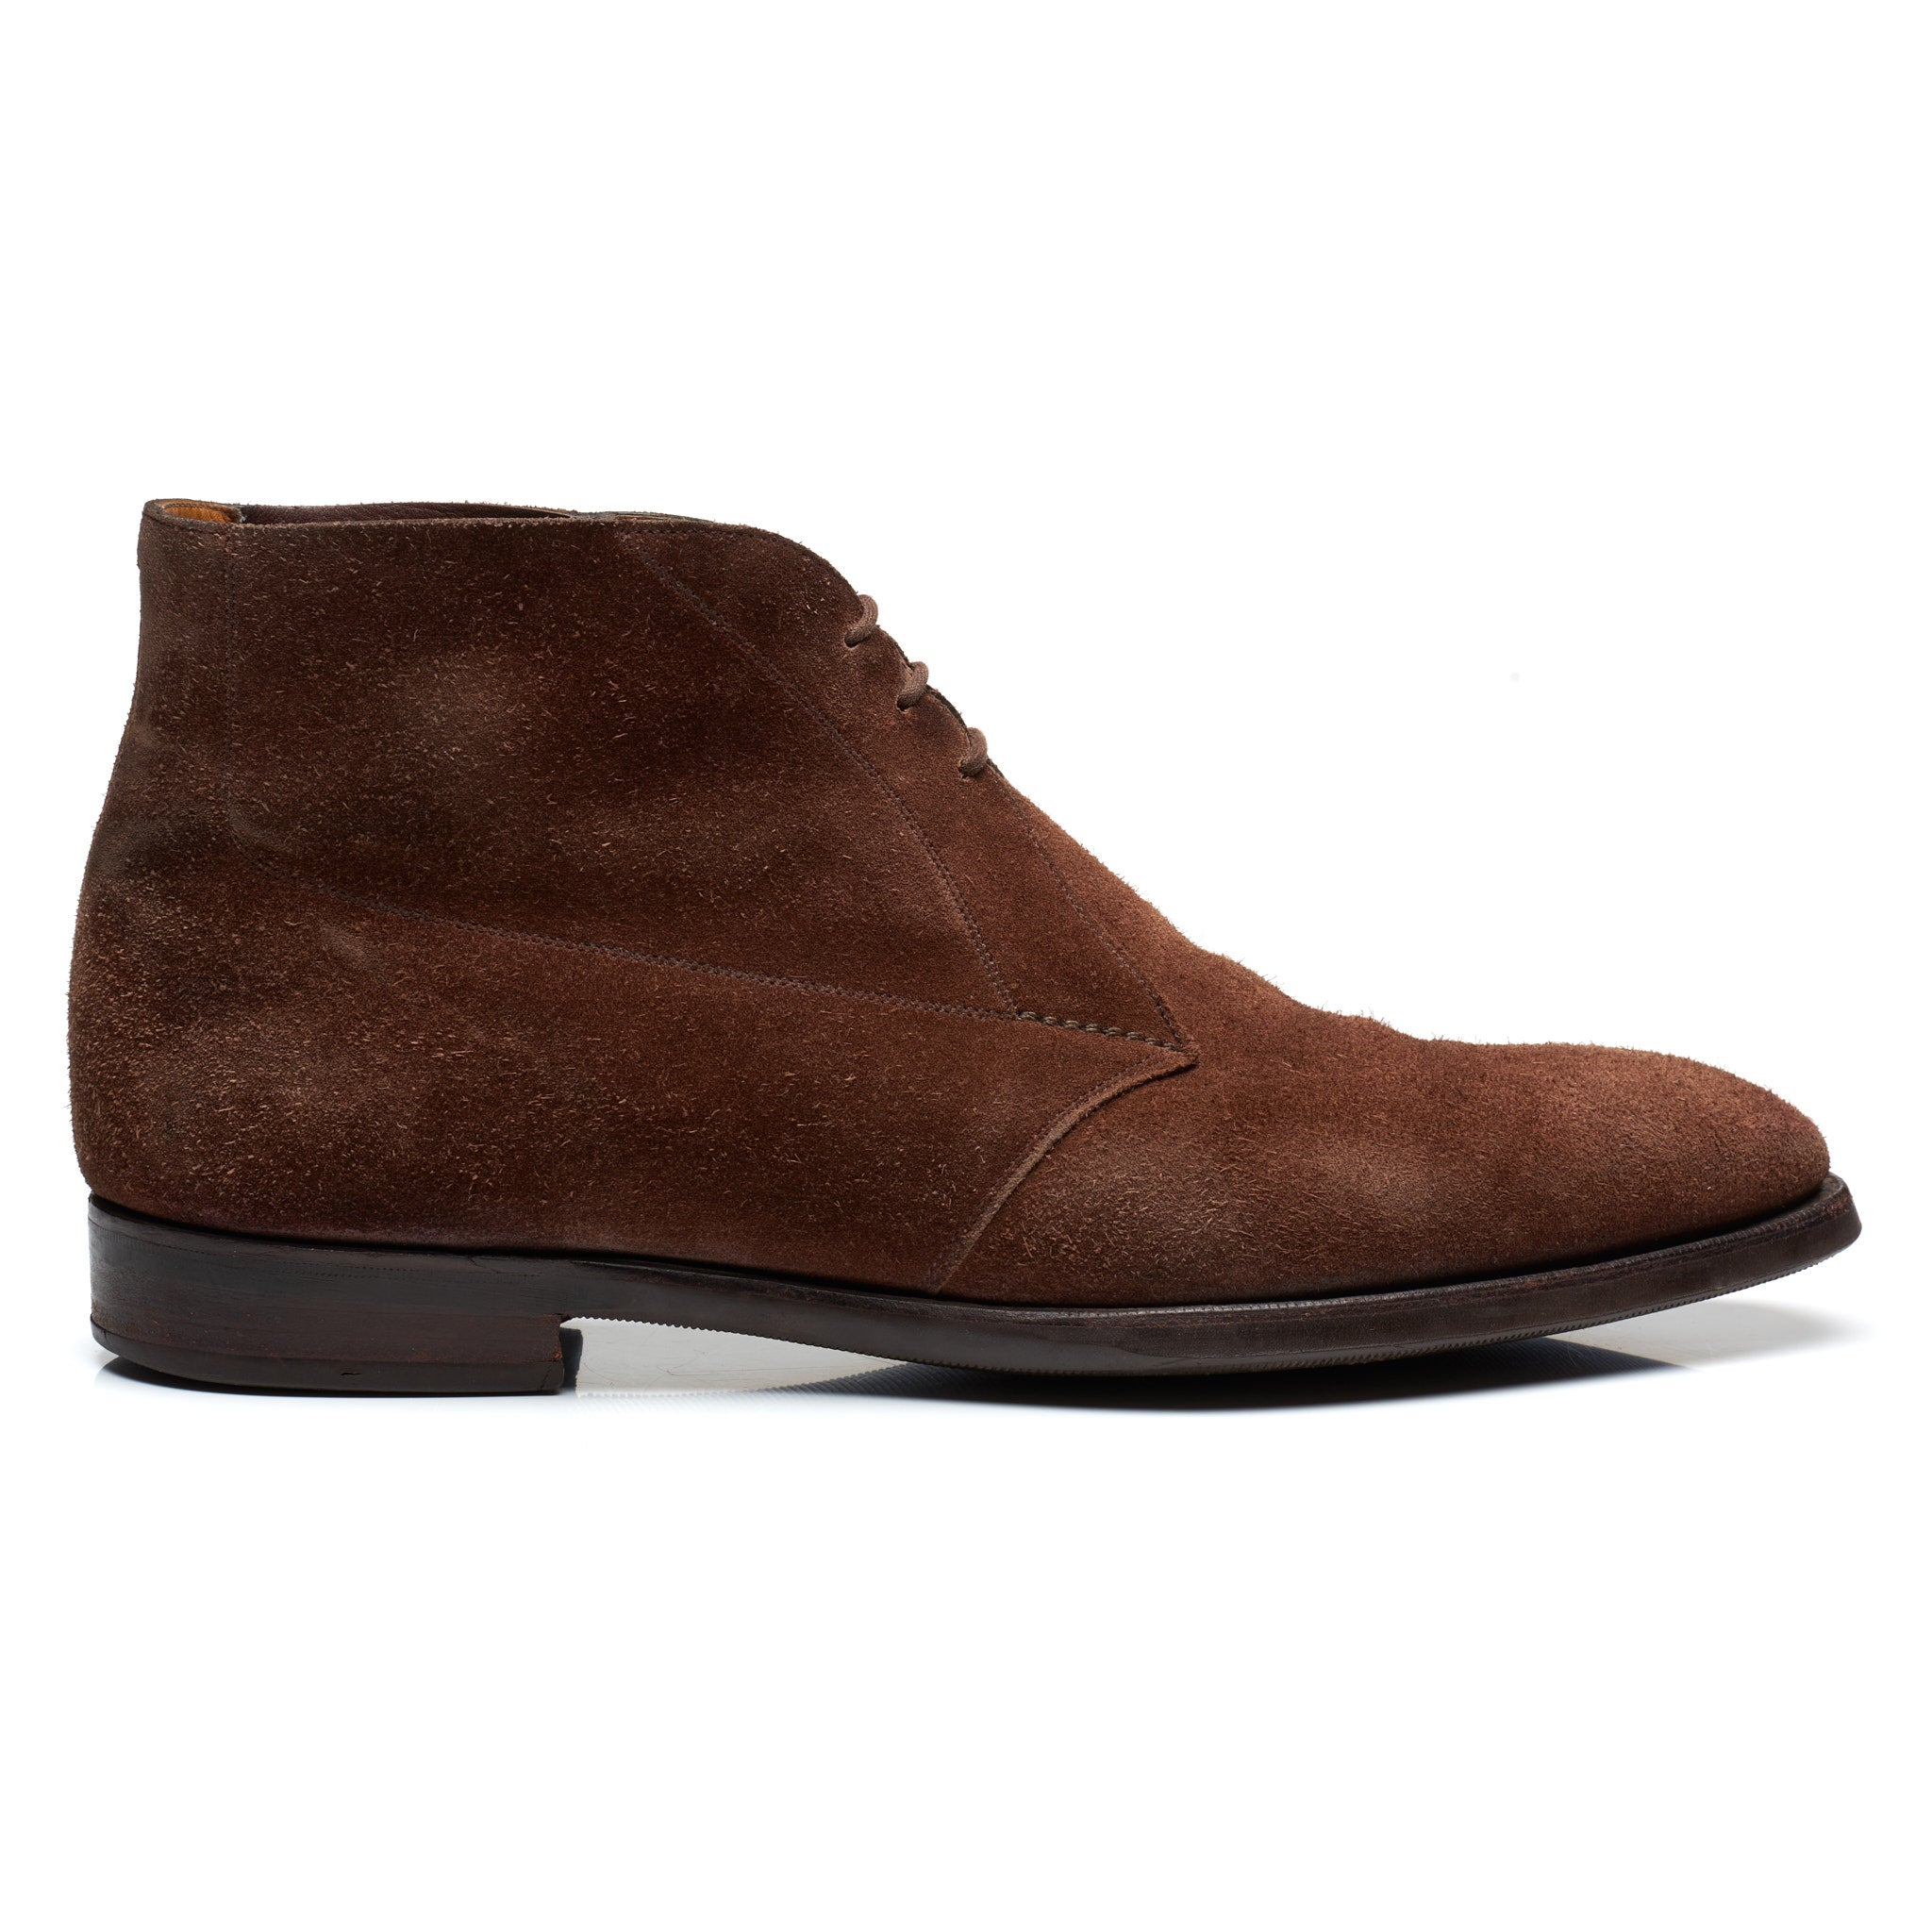 GAZIANO & GIRLING "Arran" Mink Suede Leather Chukka Boots 8E US 8.5 Last MH71 GAZIANO & GIRLING